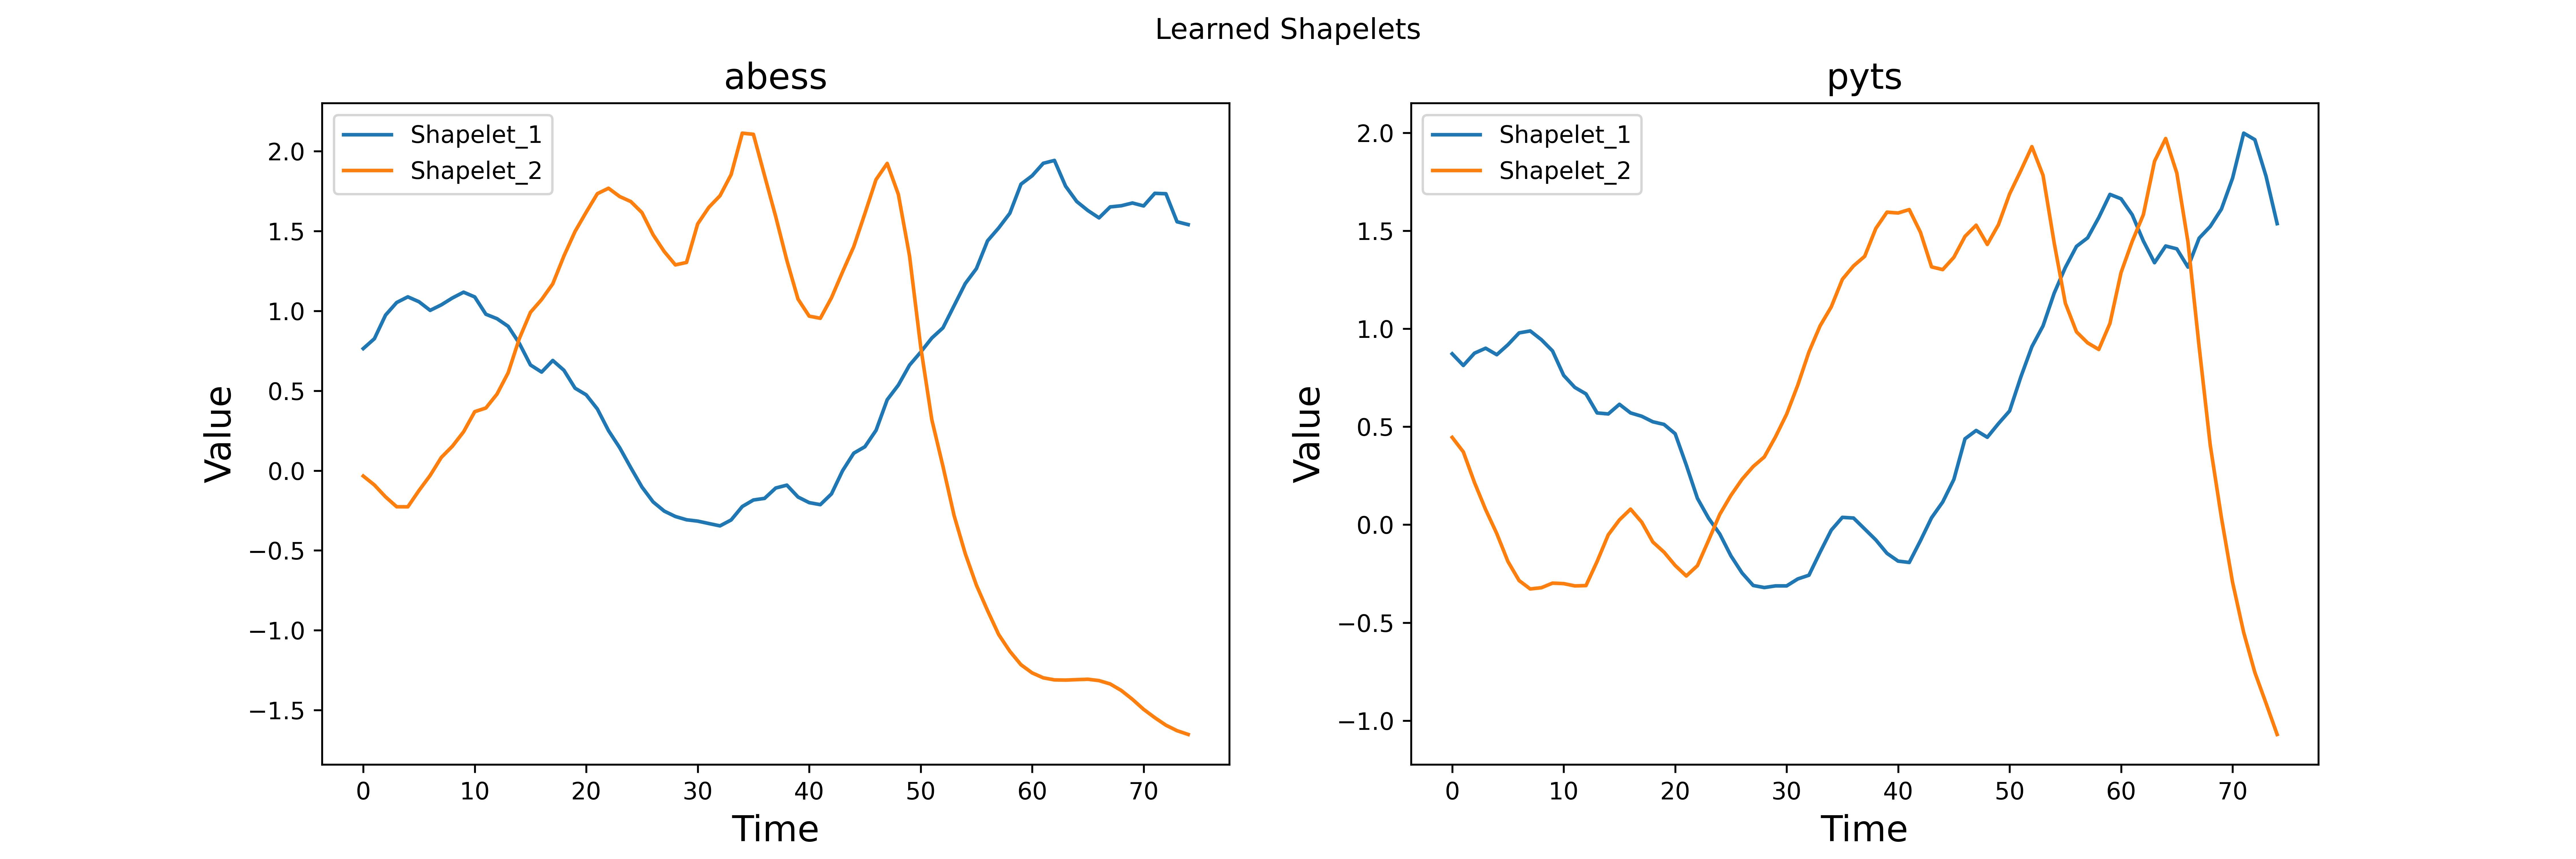 Learned Shapelets, abess, pyts